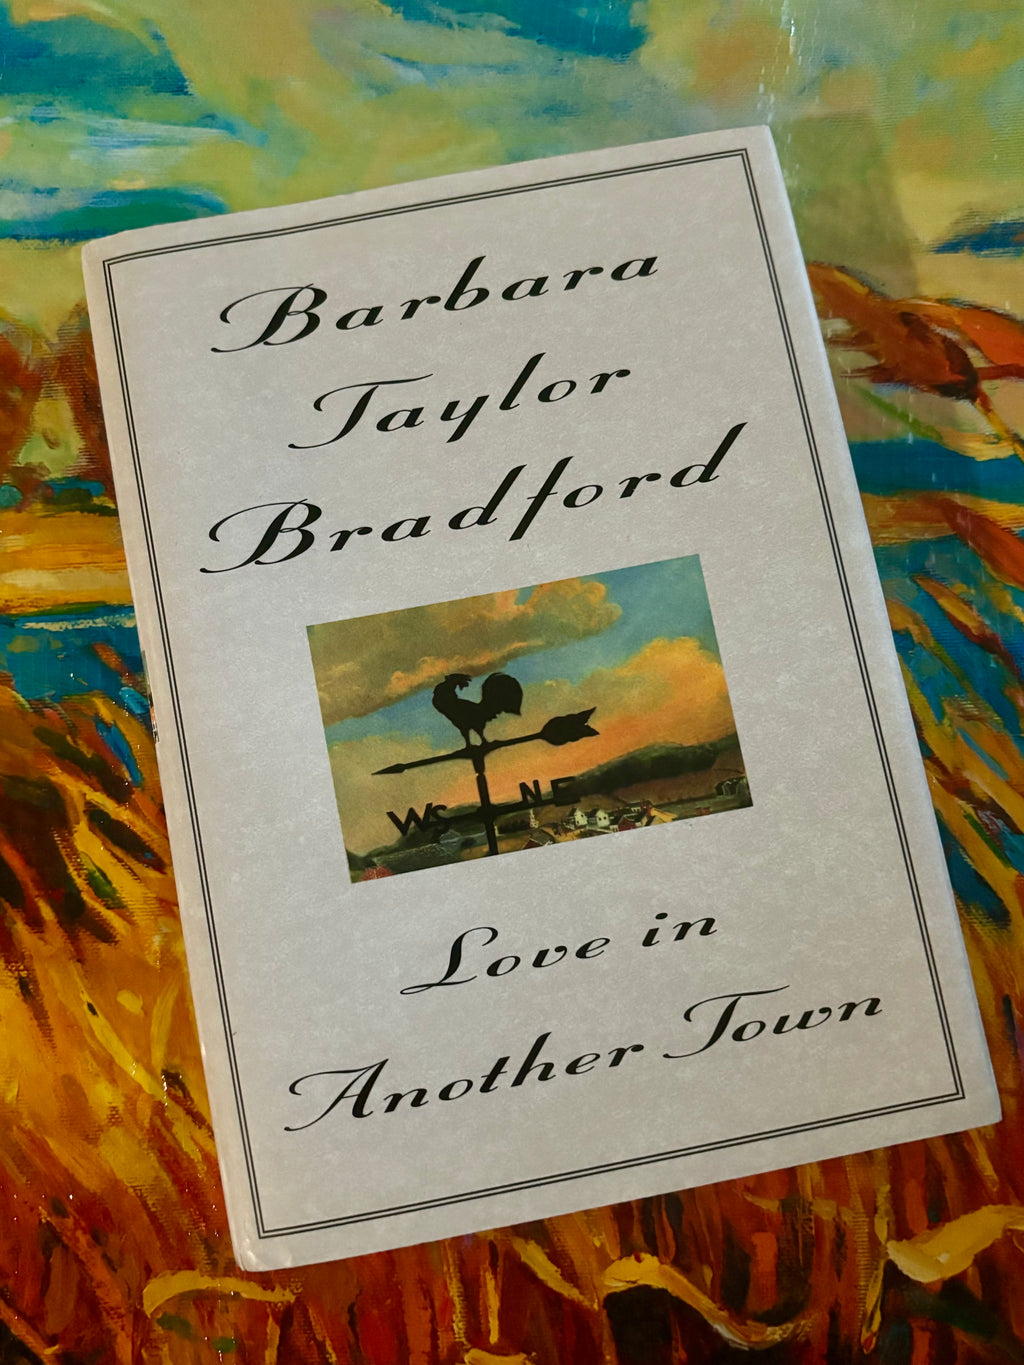 Love in Another Town- By Barbara Taylor Bradford